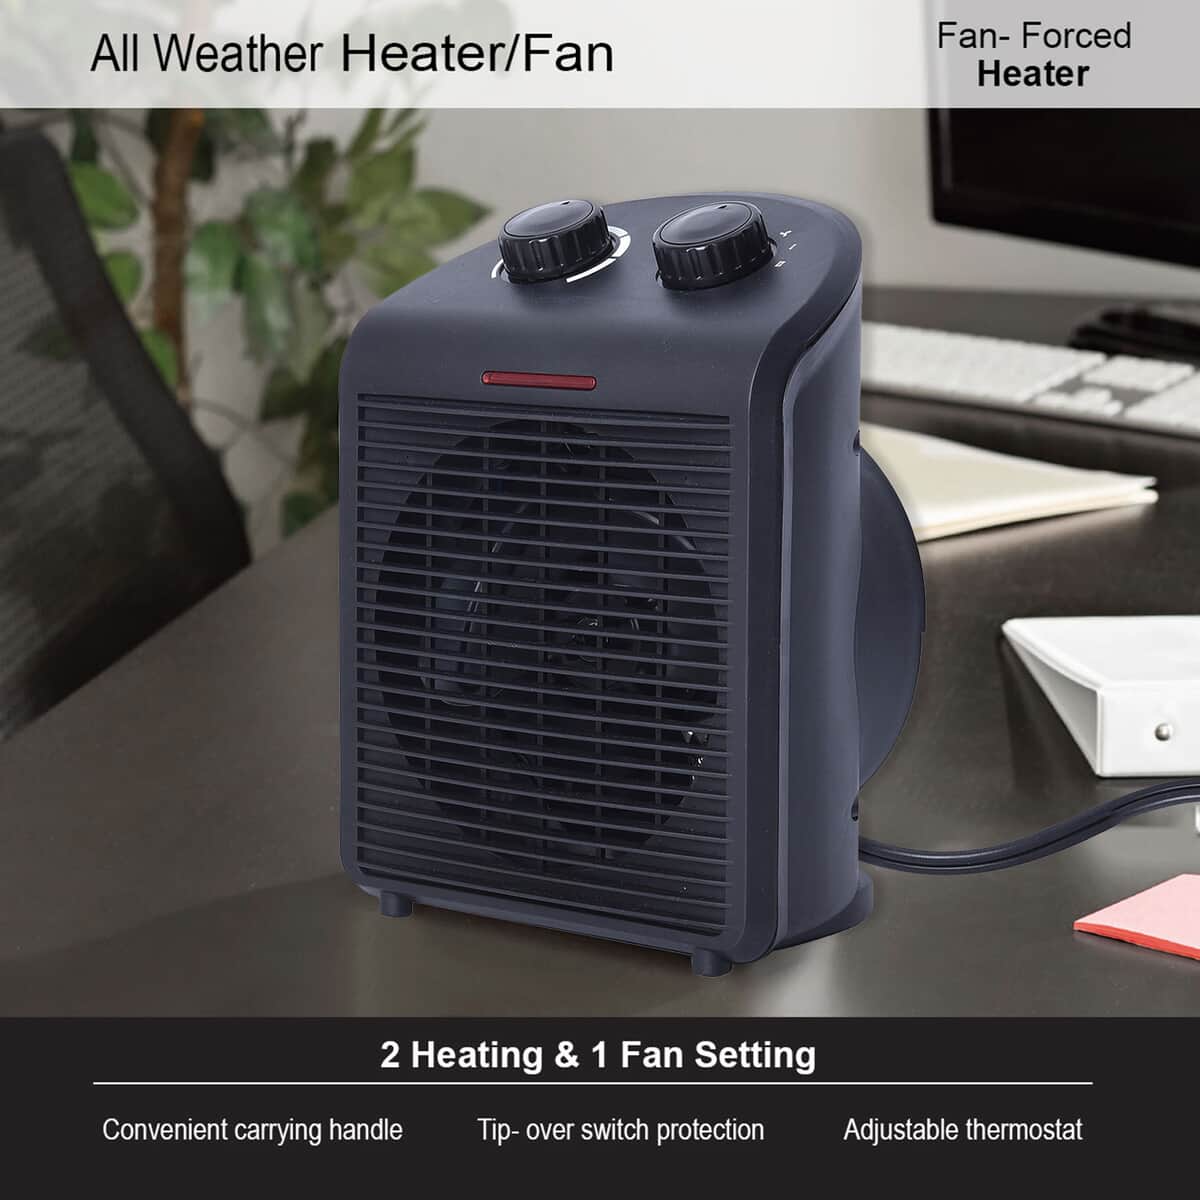 Homesmart Portable, Electric, Black 2 in 1 All Weather, Heater Fan Combo Unit, Automatic Thermostat Control, 2 Temperature, and Speed Setting image number 1